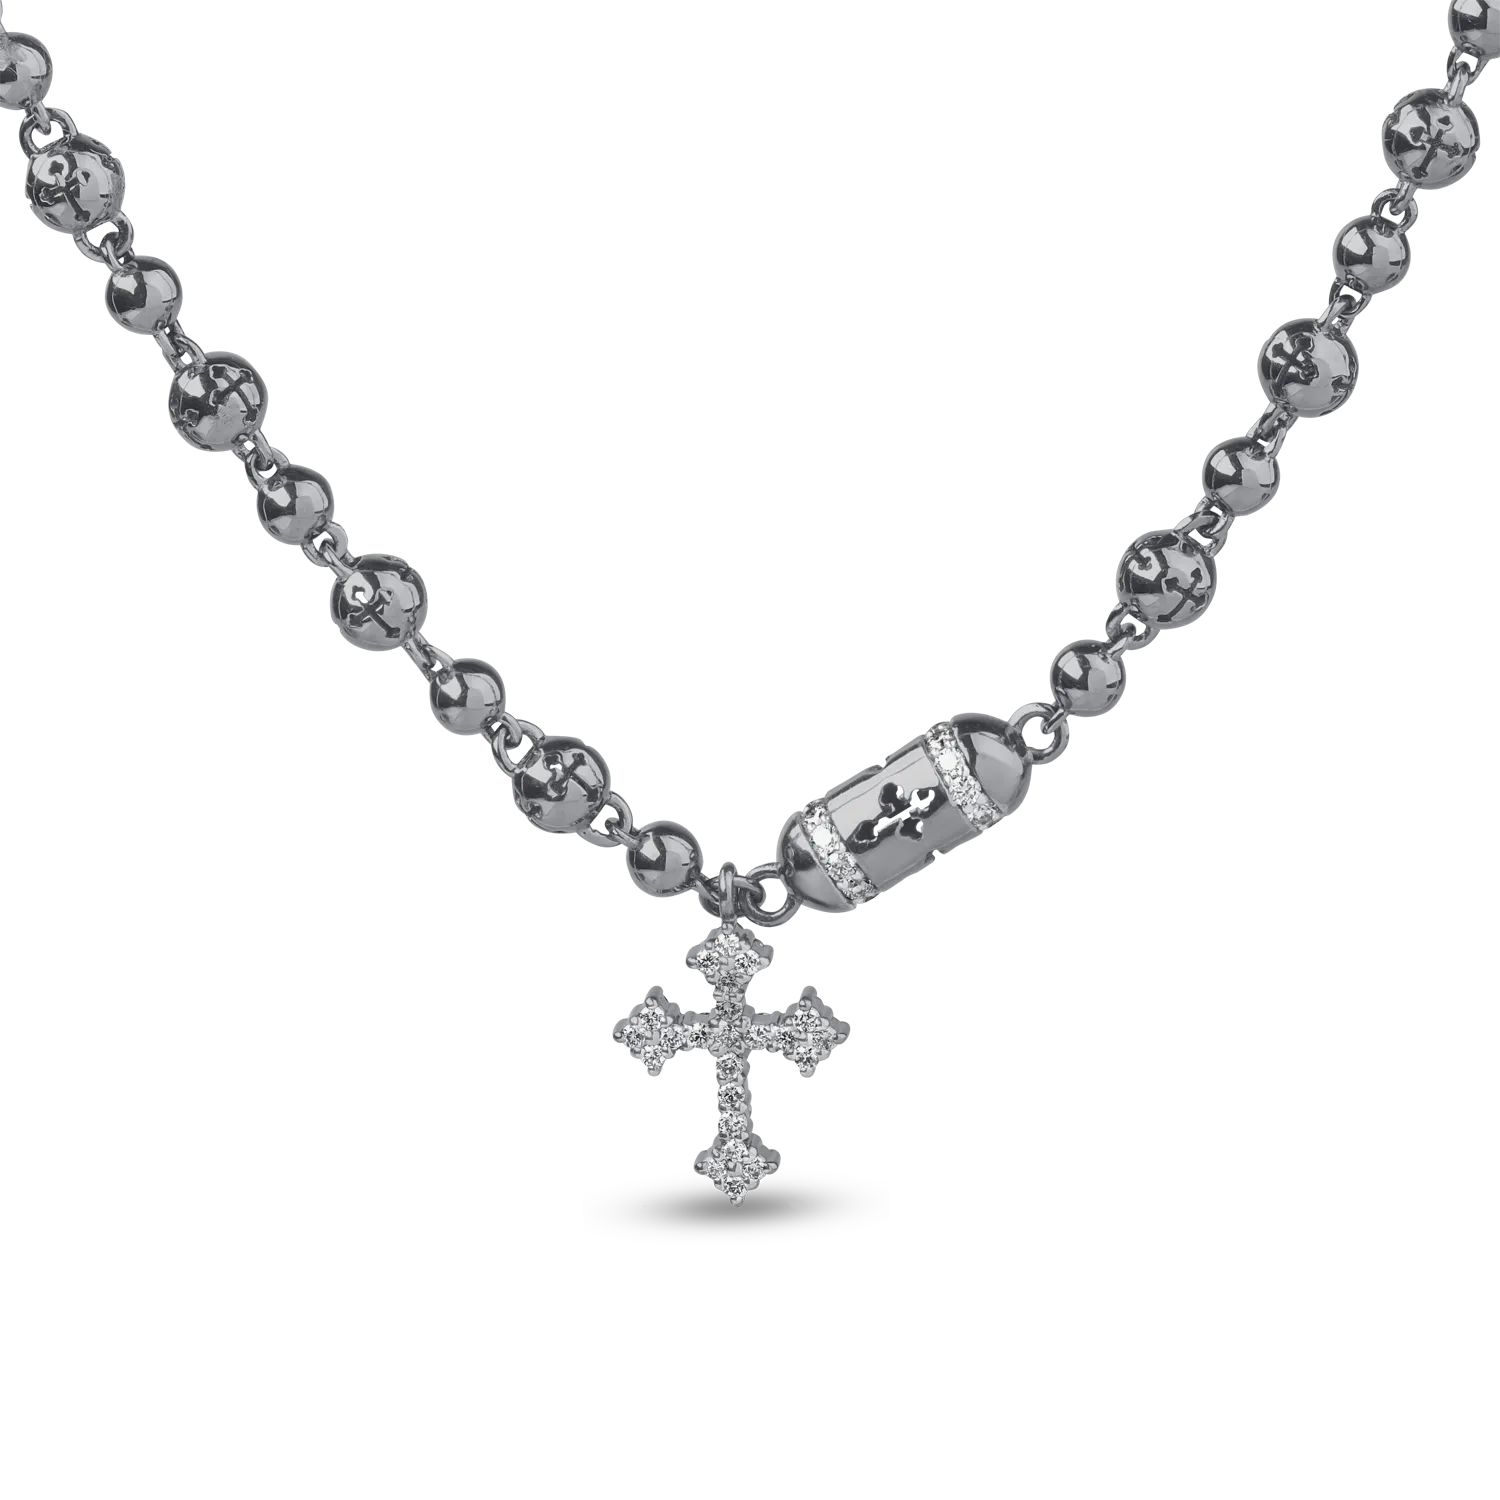 18K black gold cross pendant necklace with 0.35ct clear diamonds and 0.17ct black diamonds